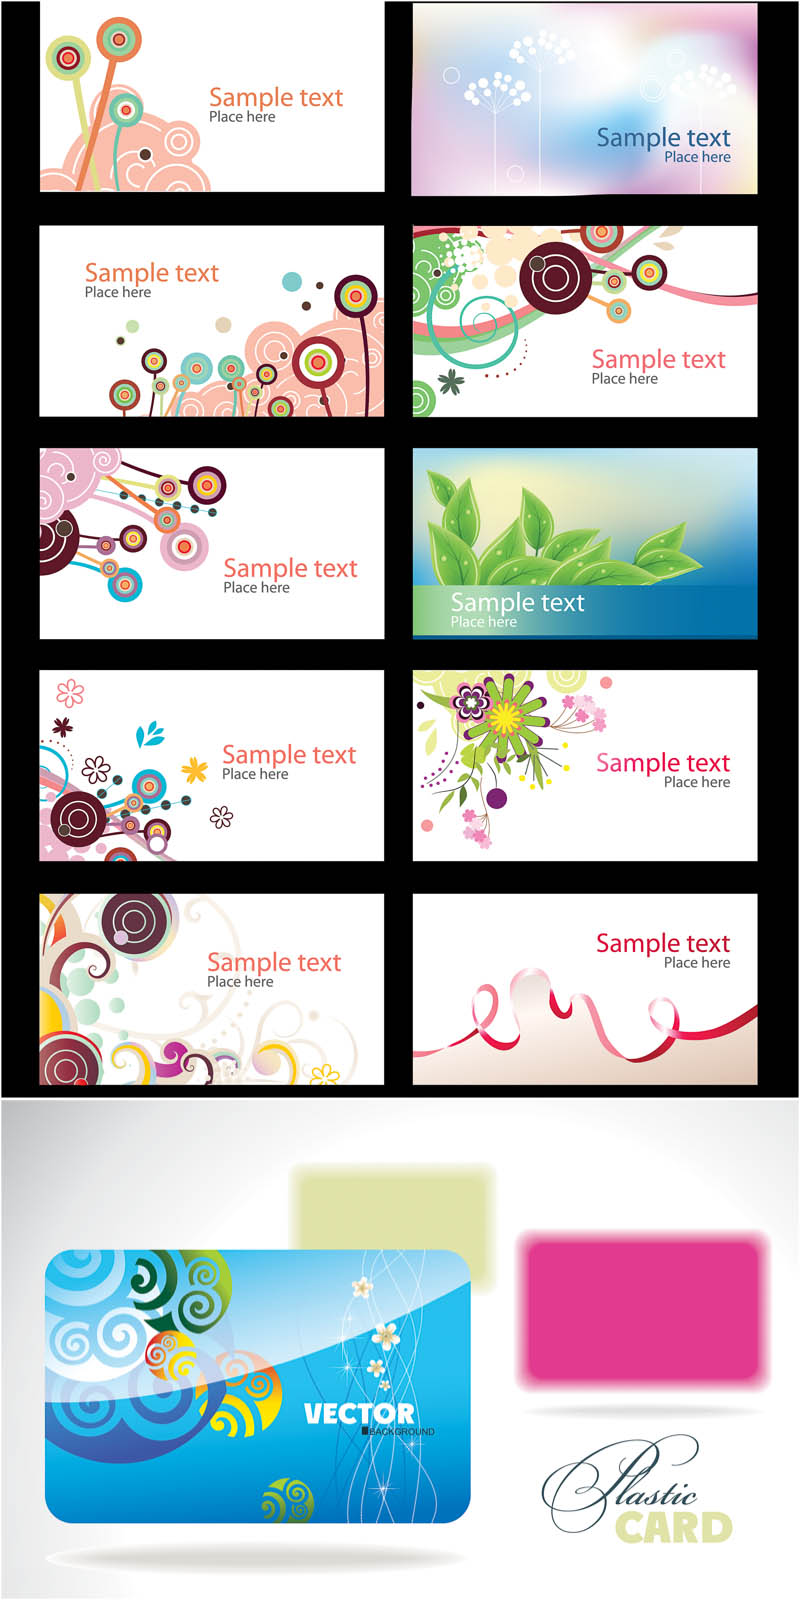 Avery Business Card Design Templates